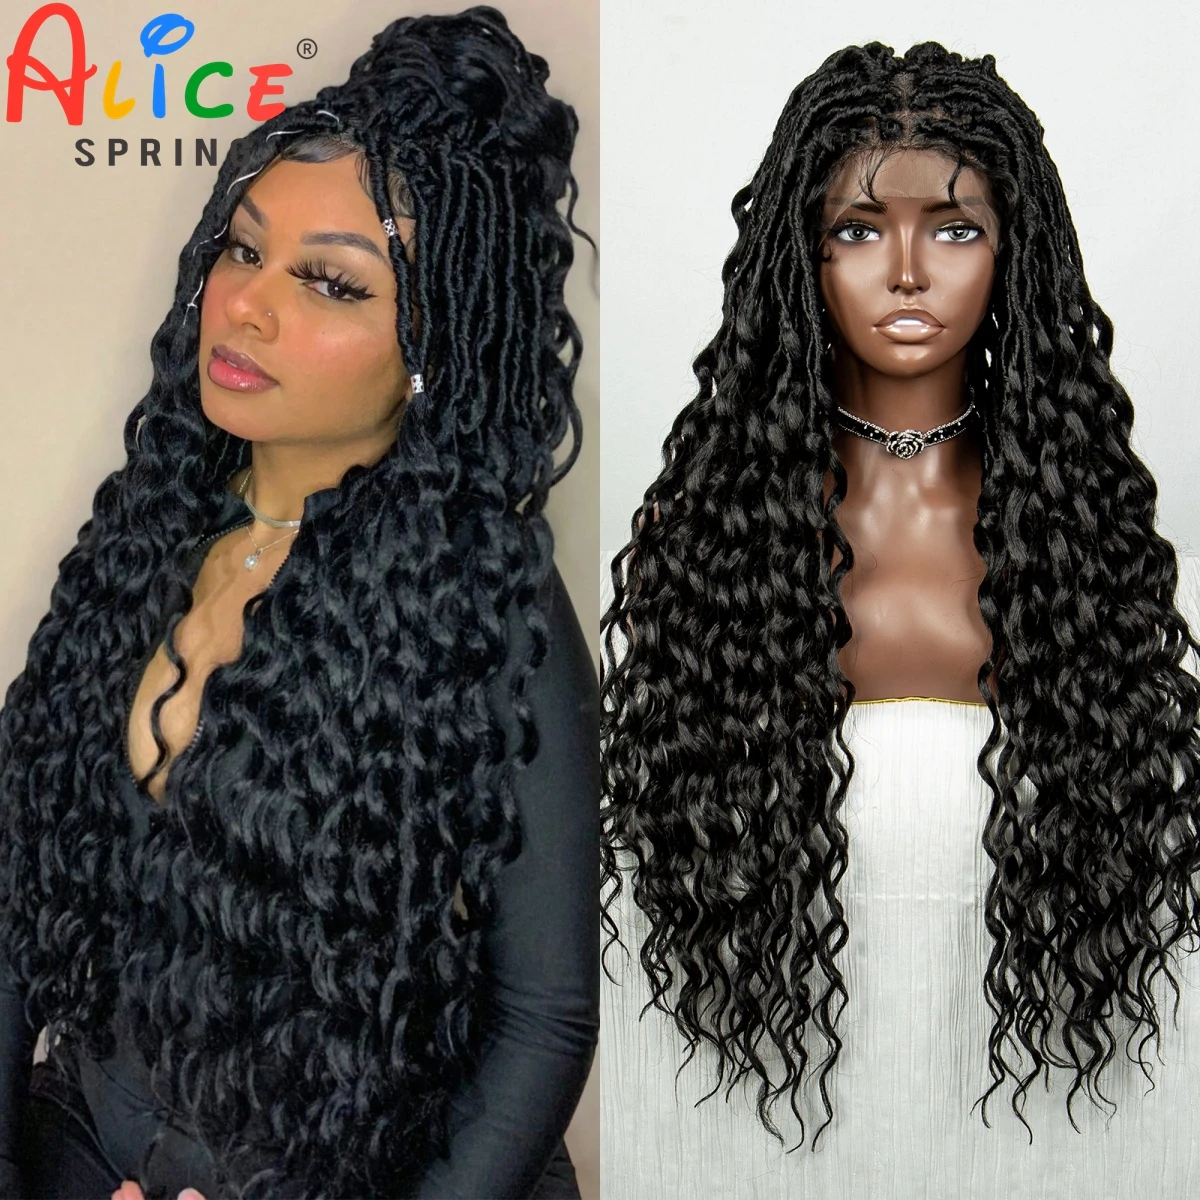 

Full Lace Braided Wig Goddess Faux Locs Braids Wigs with Curly Ends for Black Women Knotless Dreadlock Synthetic Lace Twist Wigs